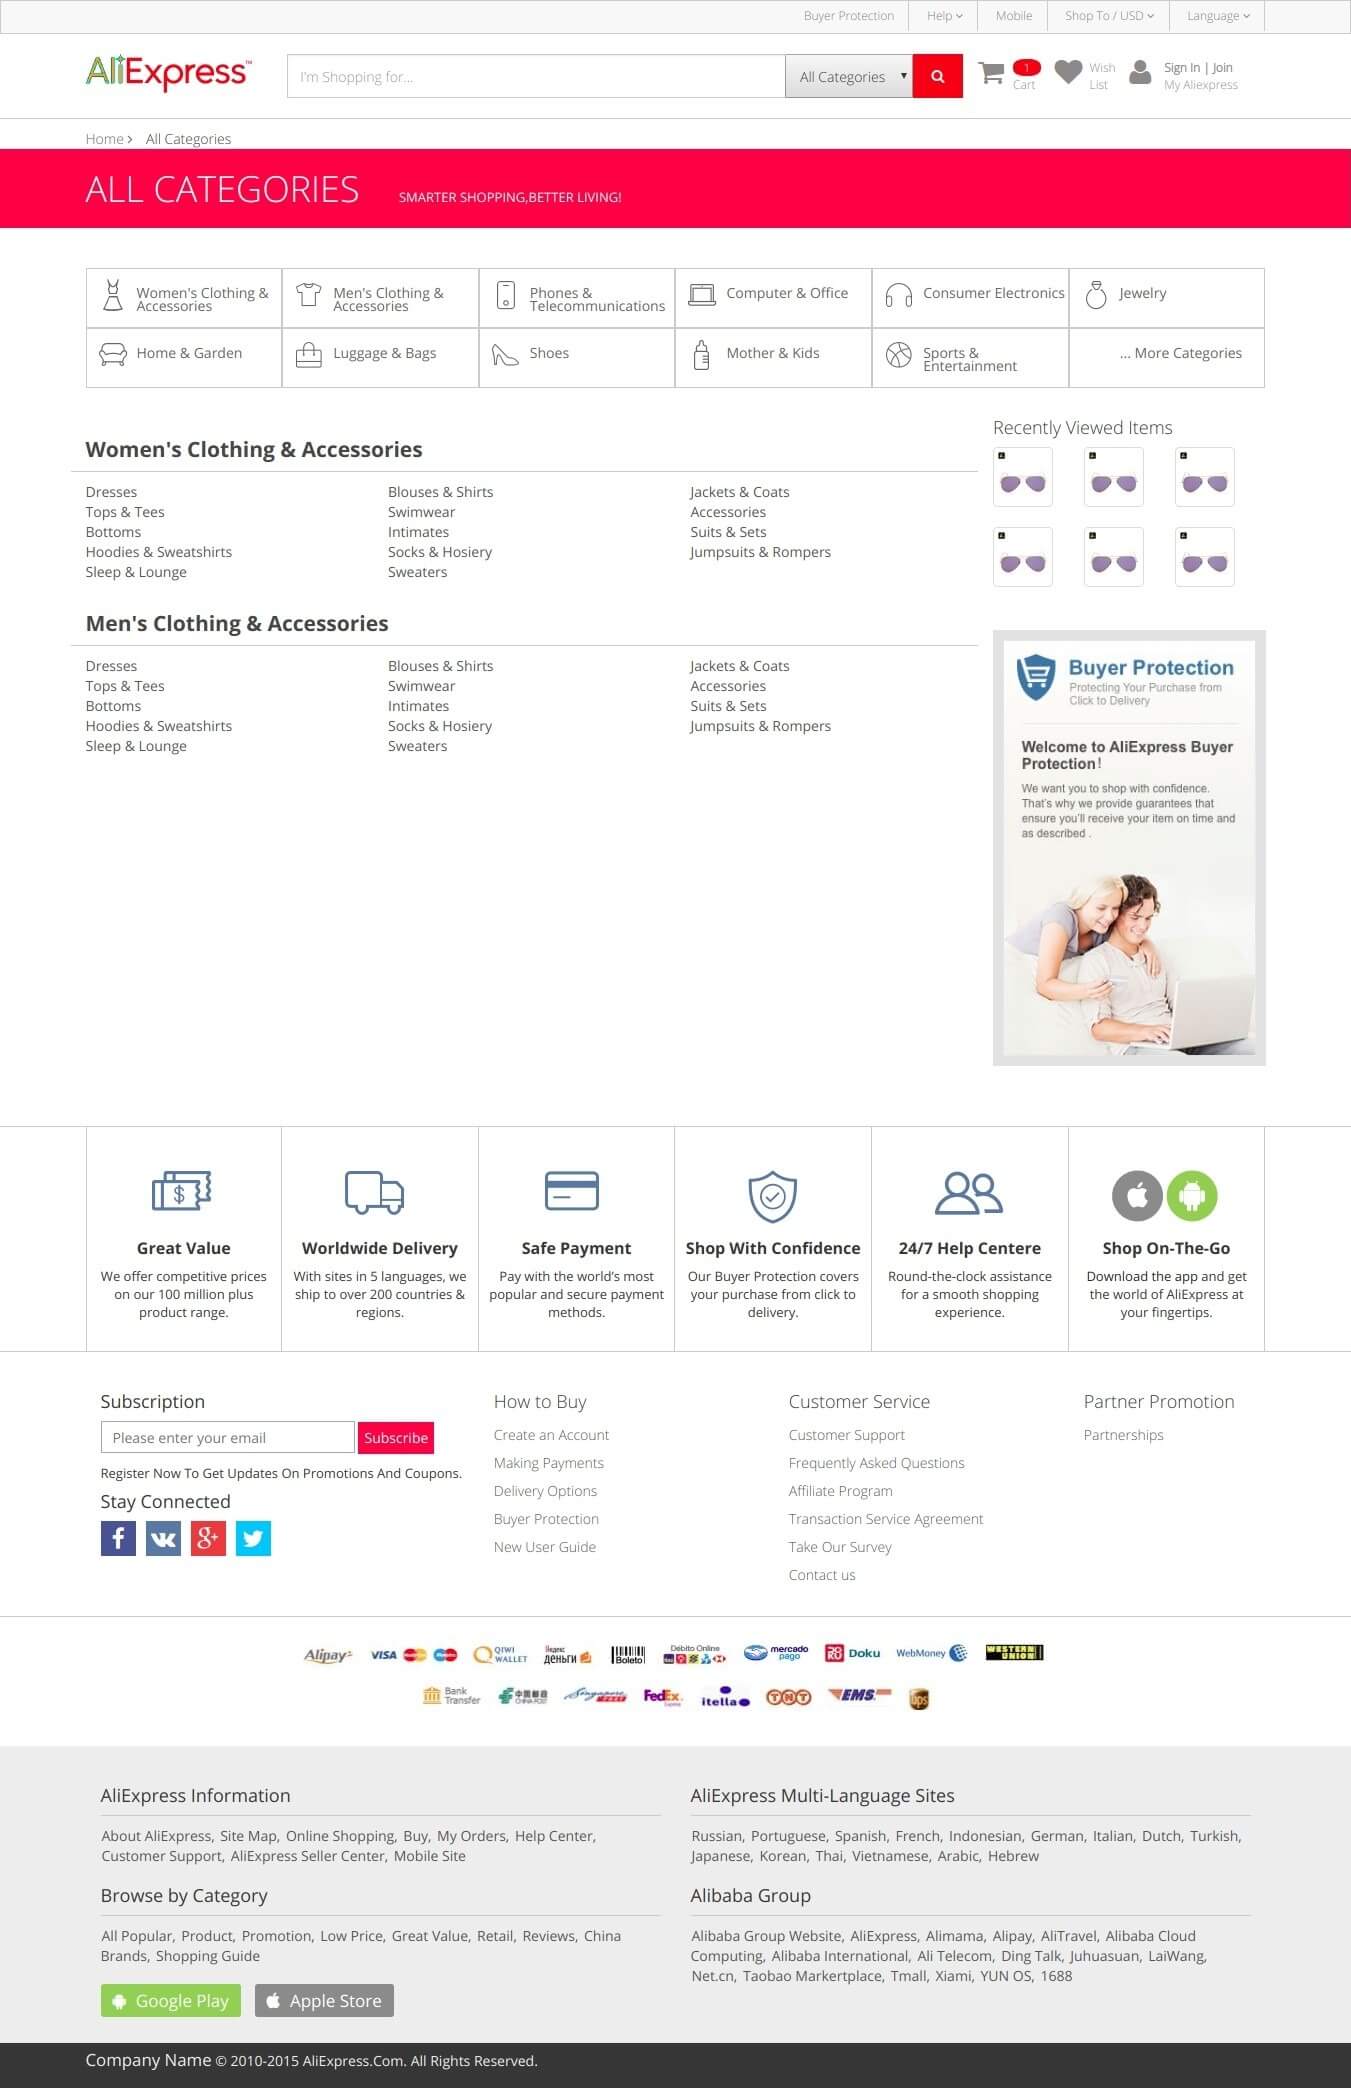 Product Category page Design - View image in New Tab for large experience